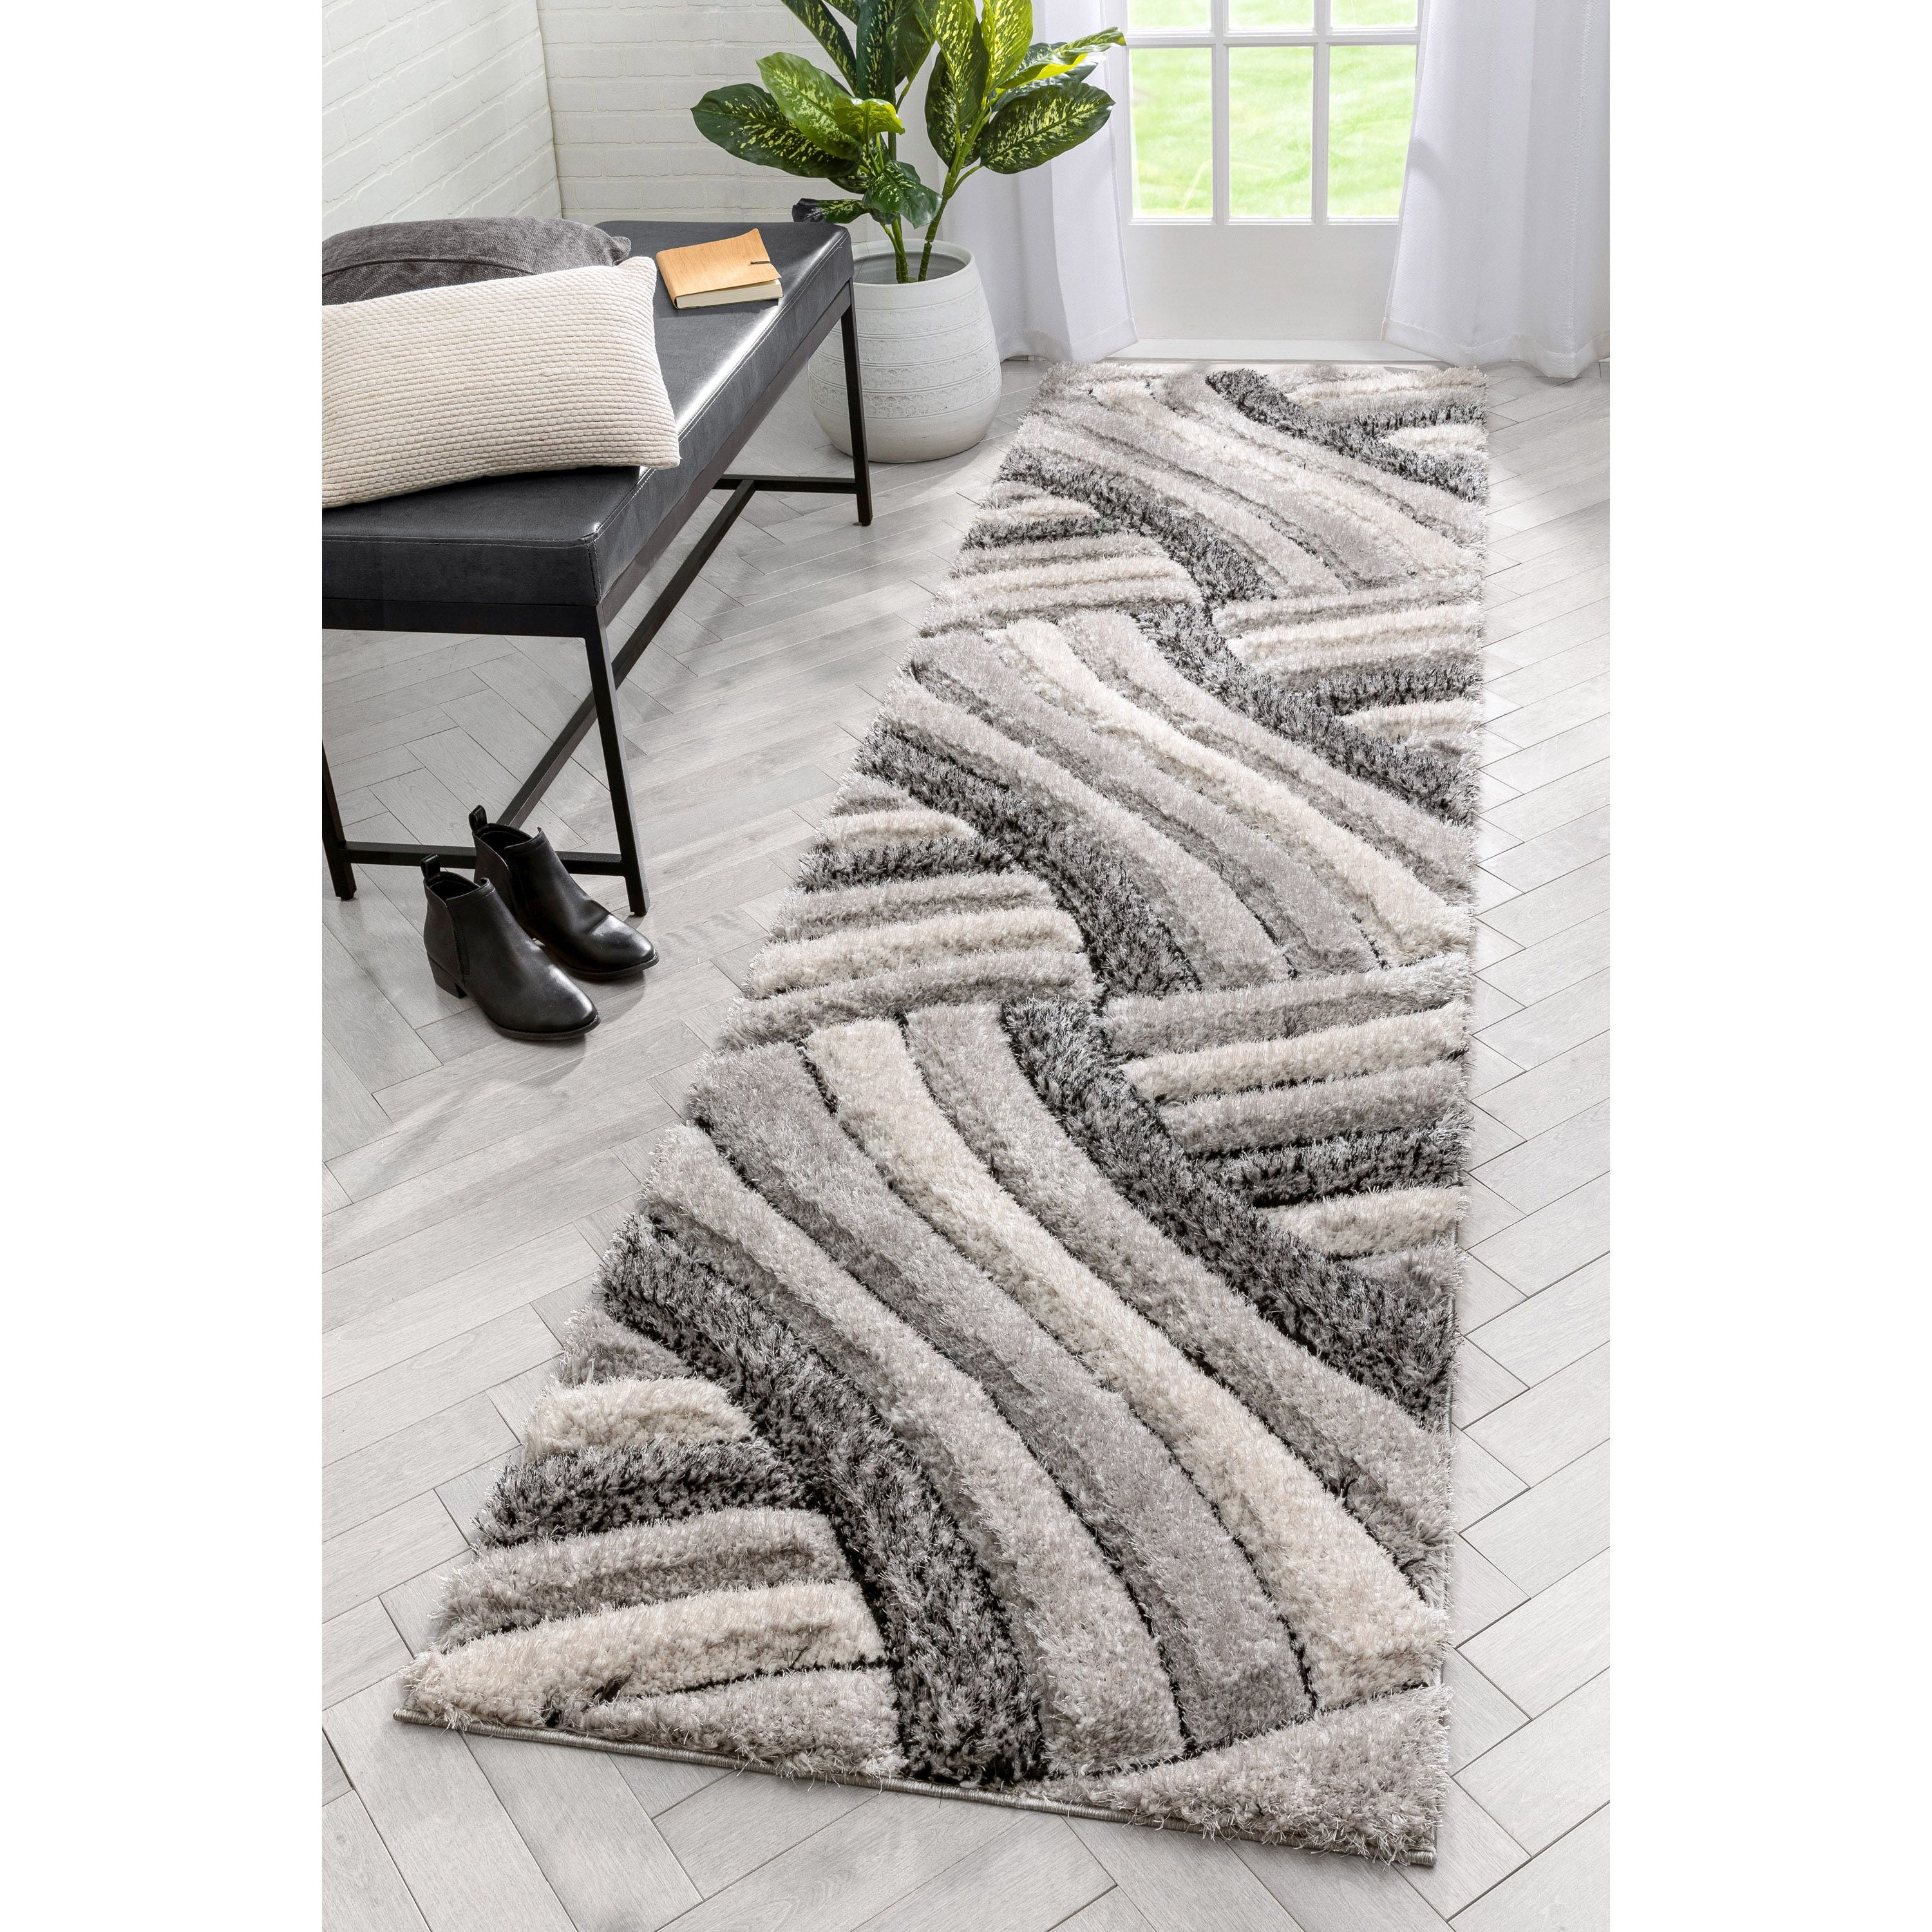 GREY SILVER NOBLE HOUSE GEOMETRIC 3D TEXTURED DIAMONDS SOFT THICK SHAGGY RUGS 